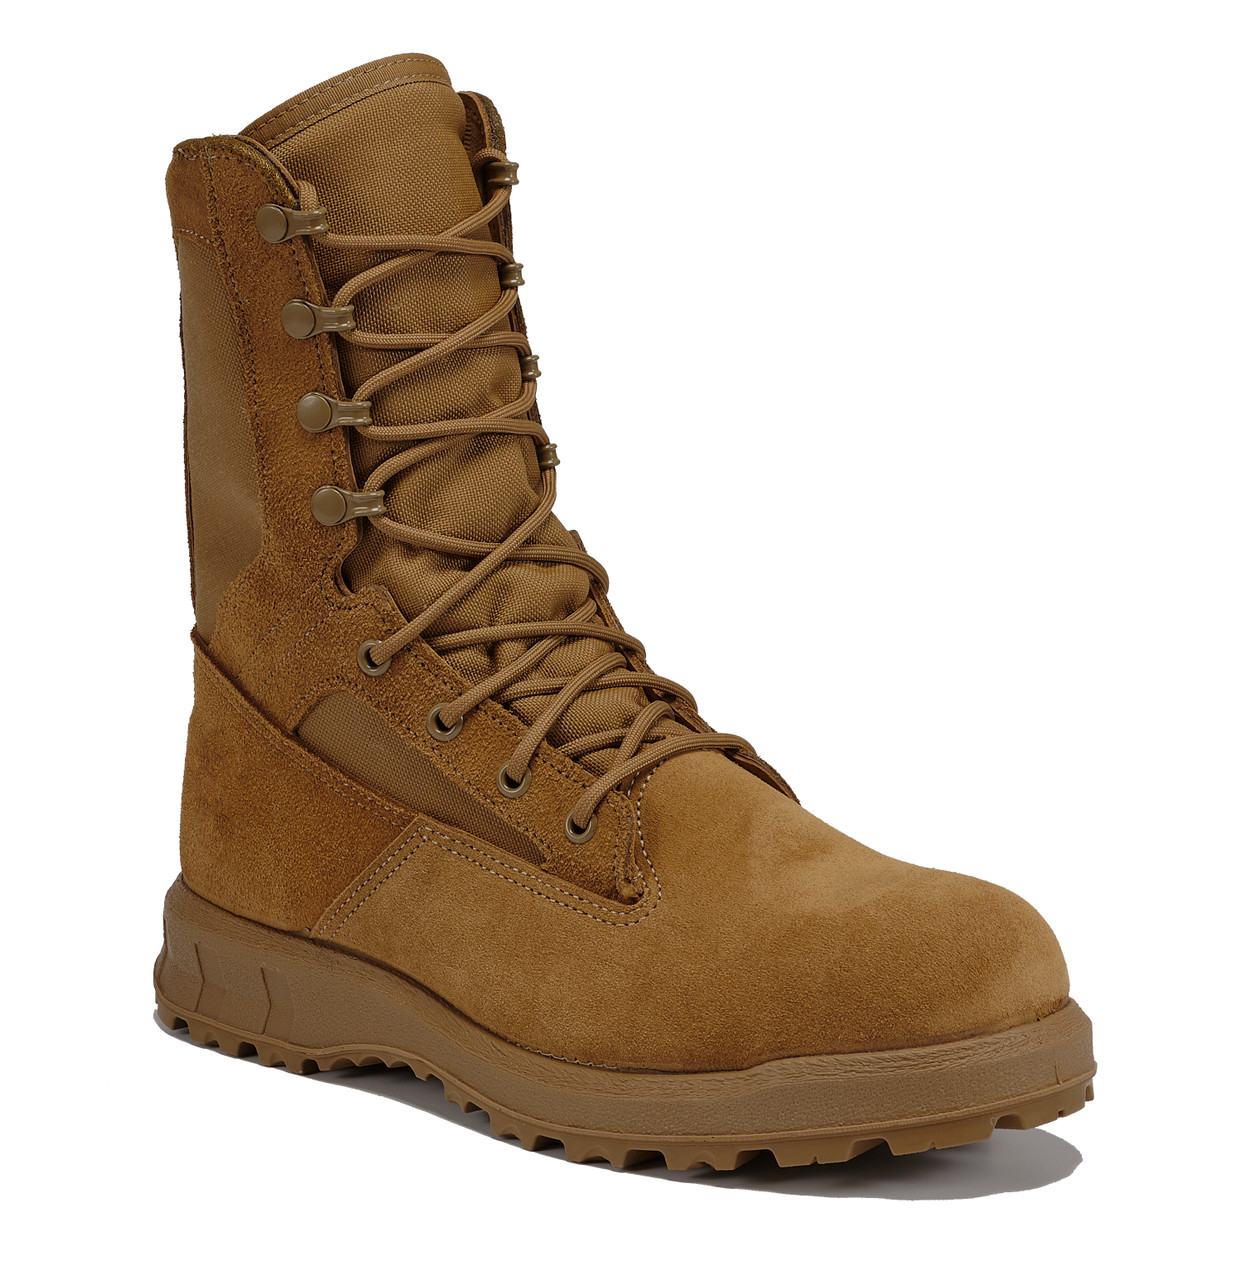 BELLEVILLE C290 ULTRALIGHT 8" COMBAT AND TRAINING BOOTS